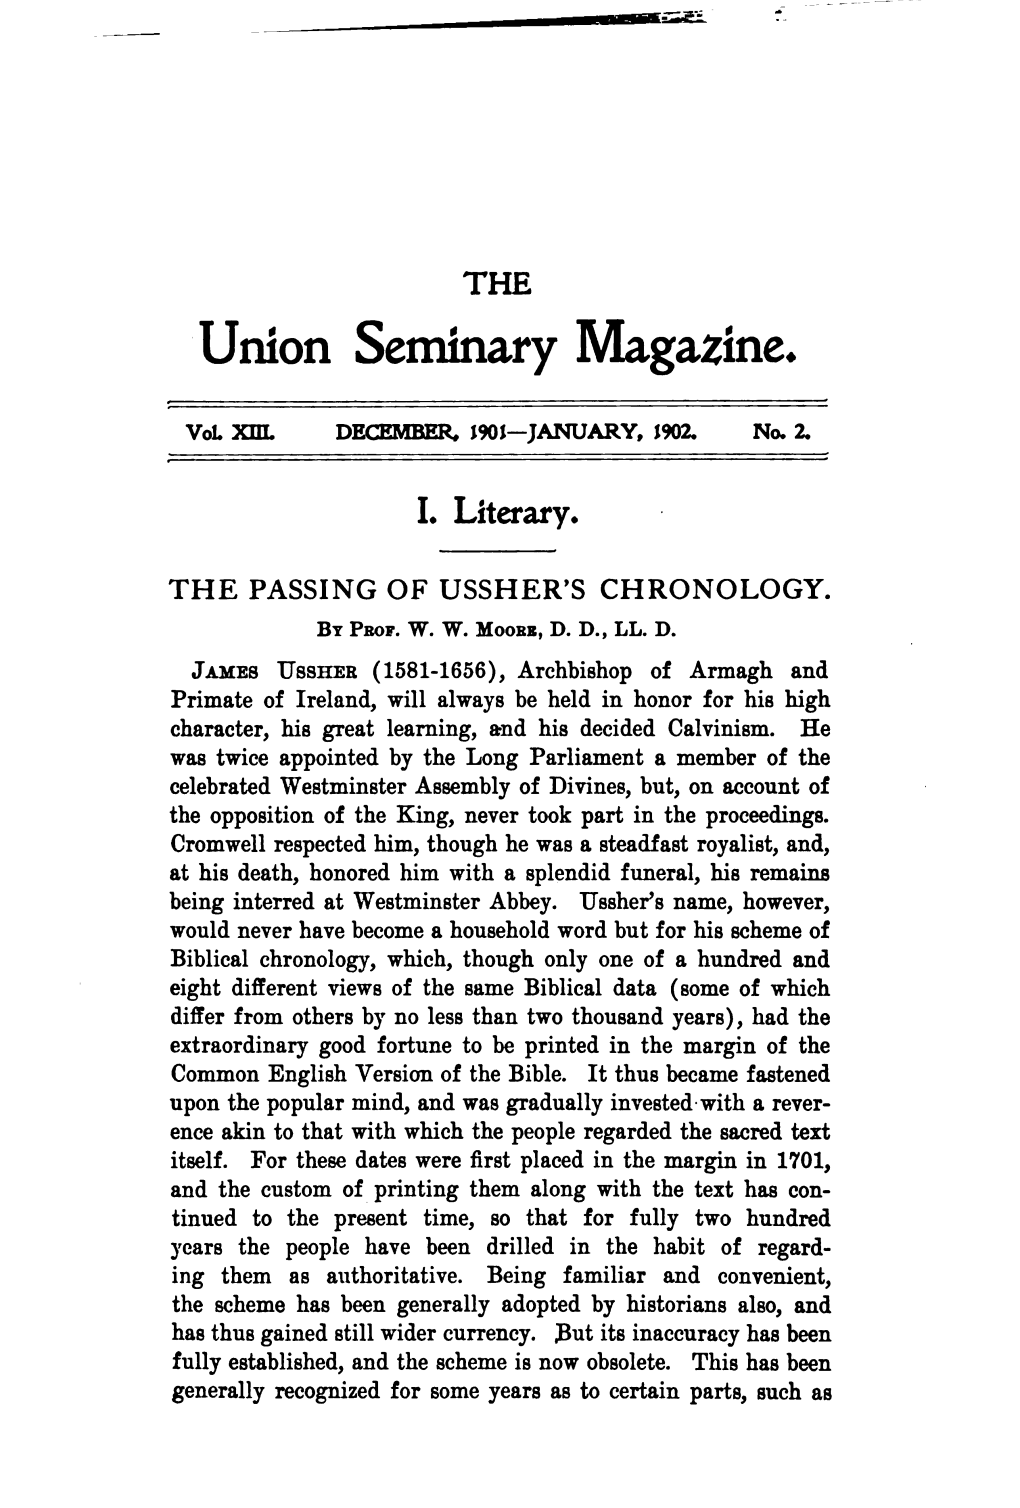 The Passing of Ussher's Chronology